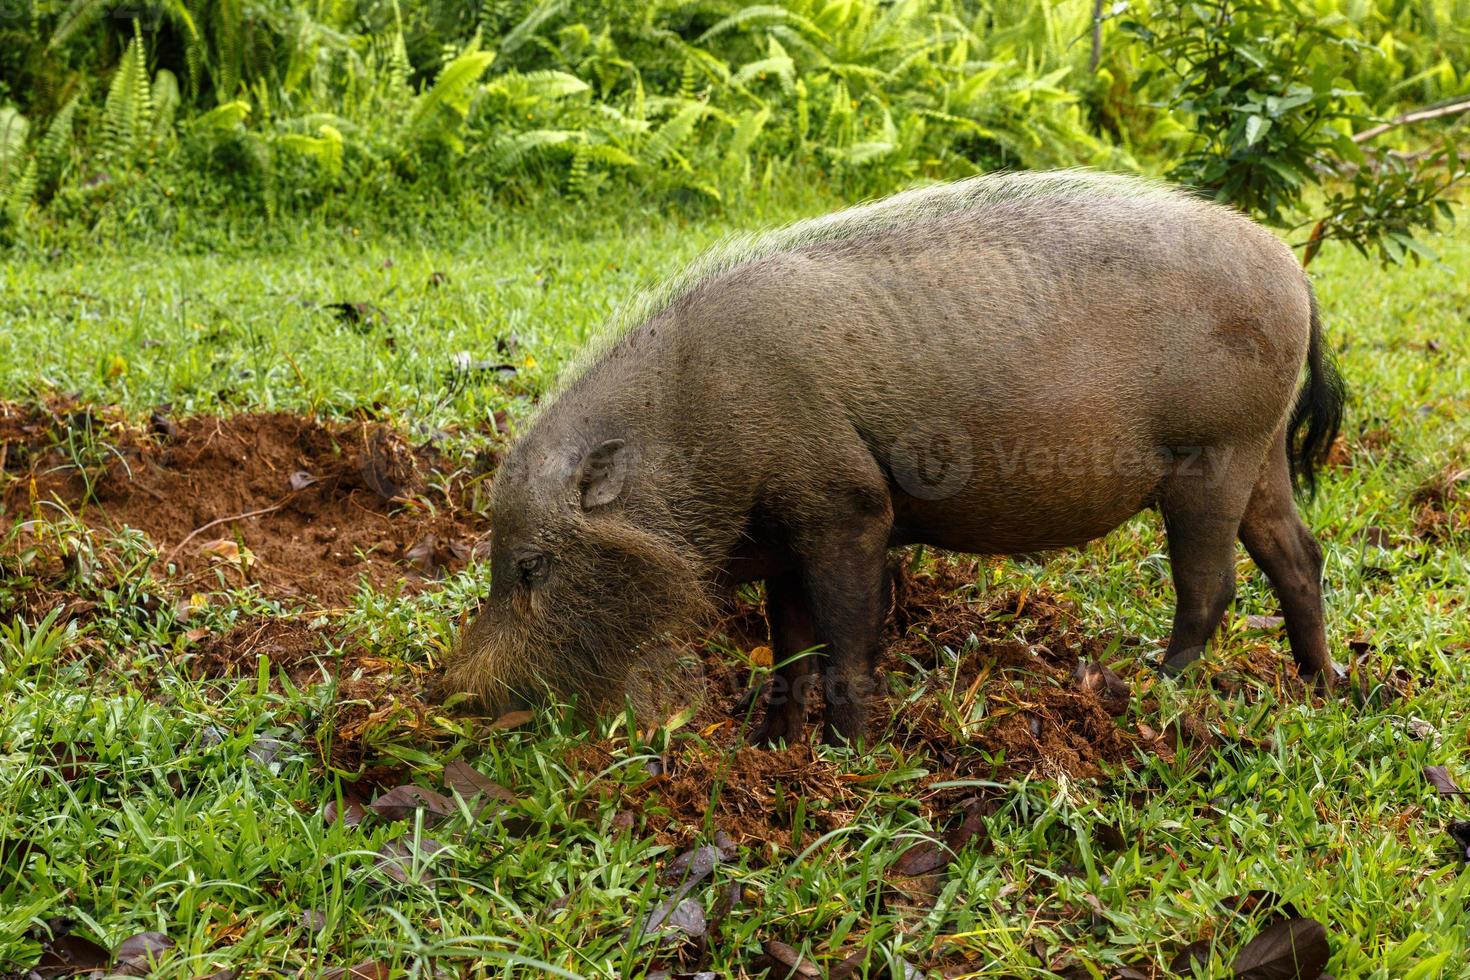 bearded pig digs the earth on a green lawn. photo